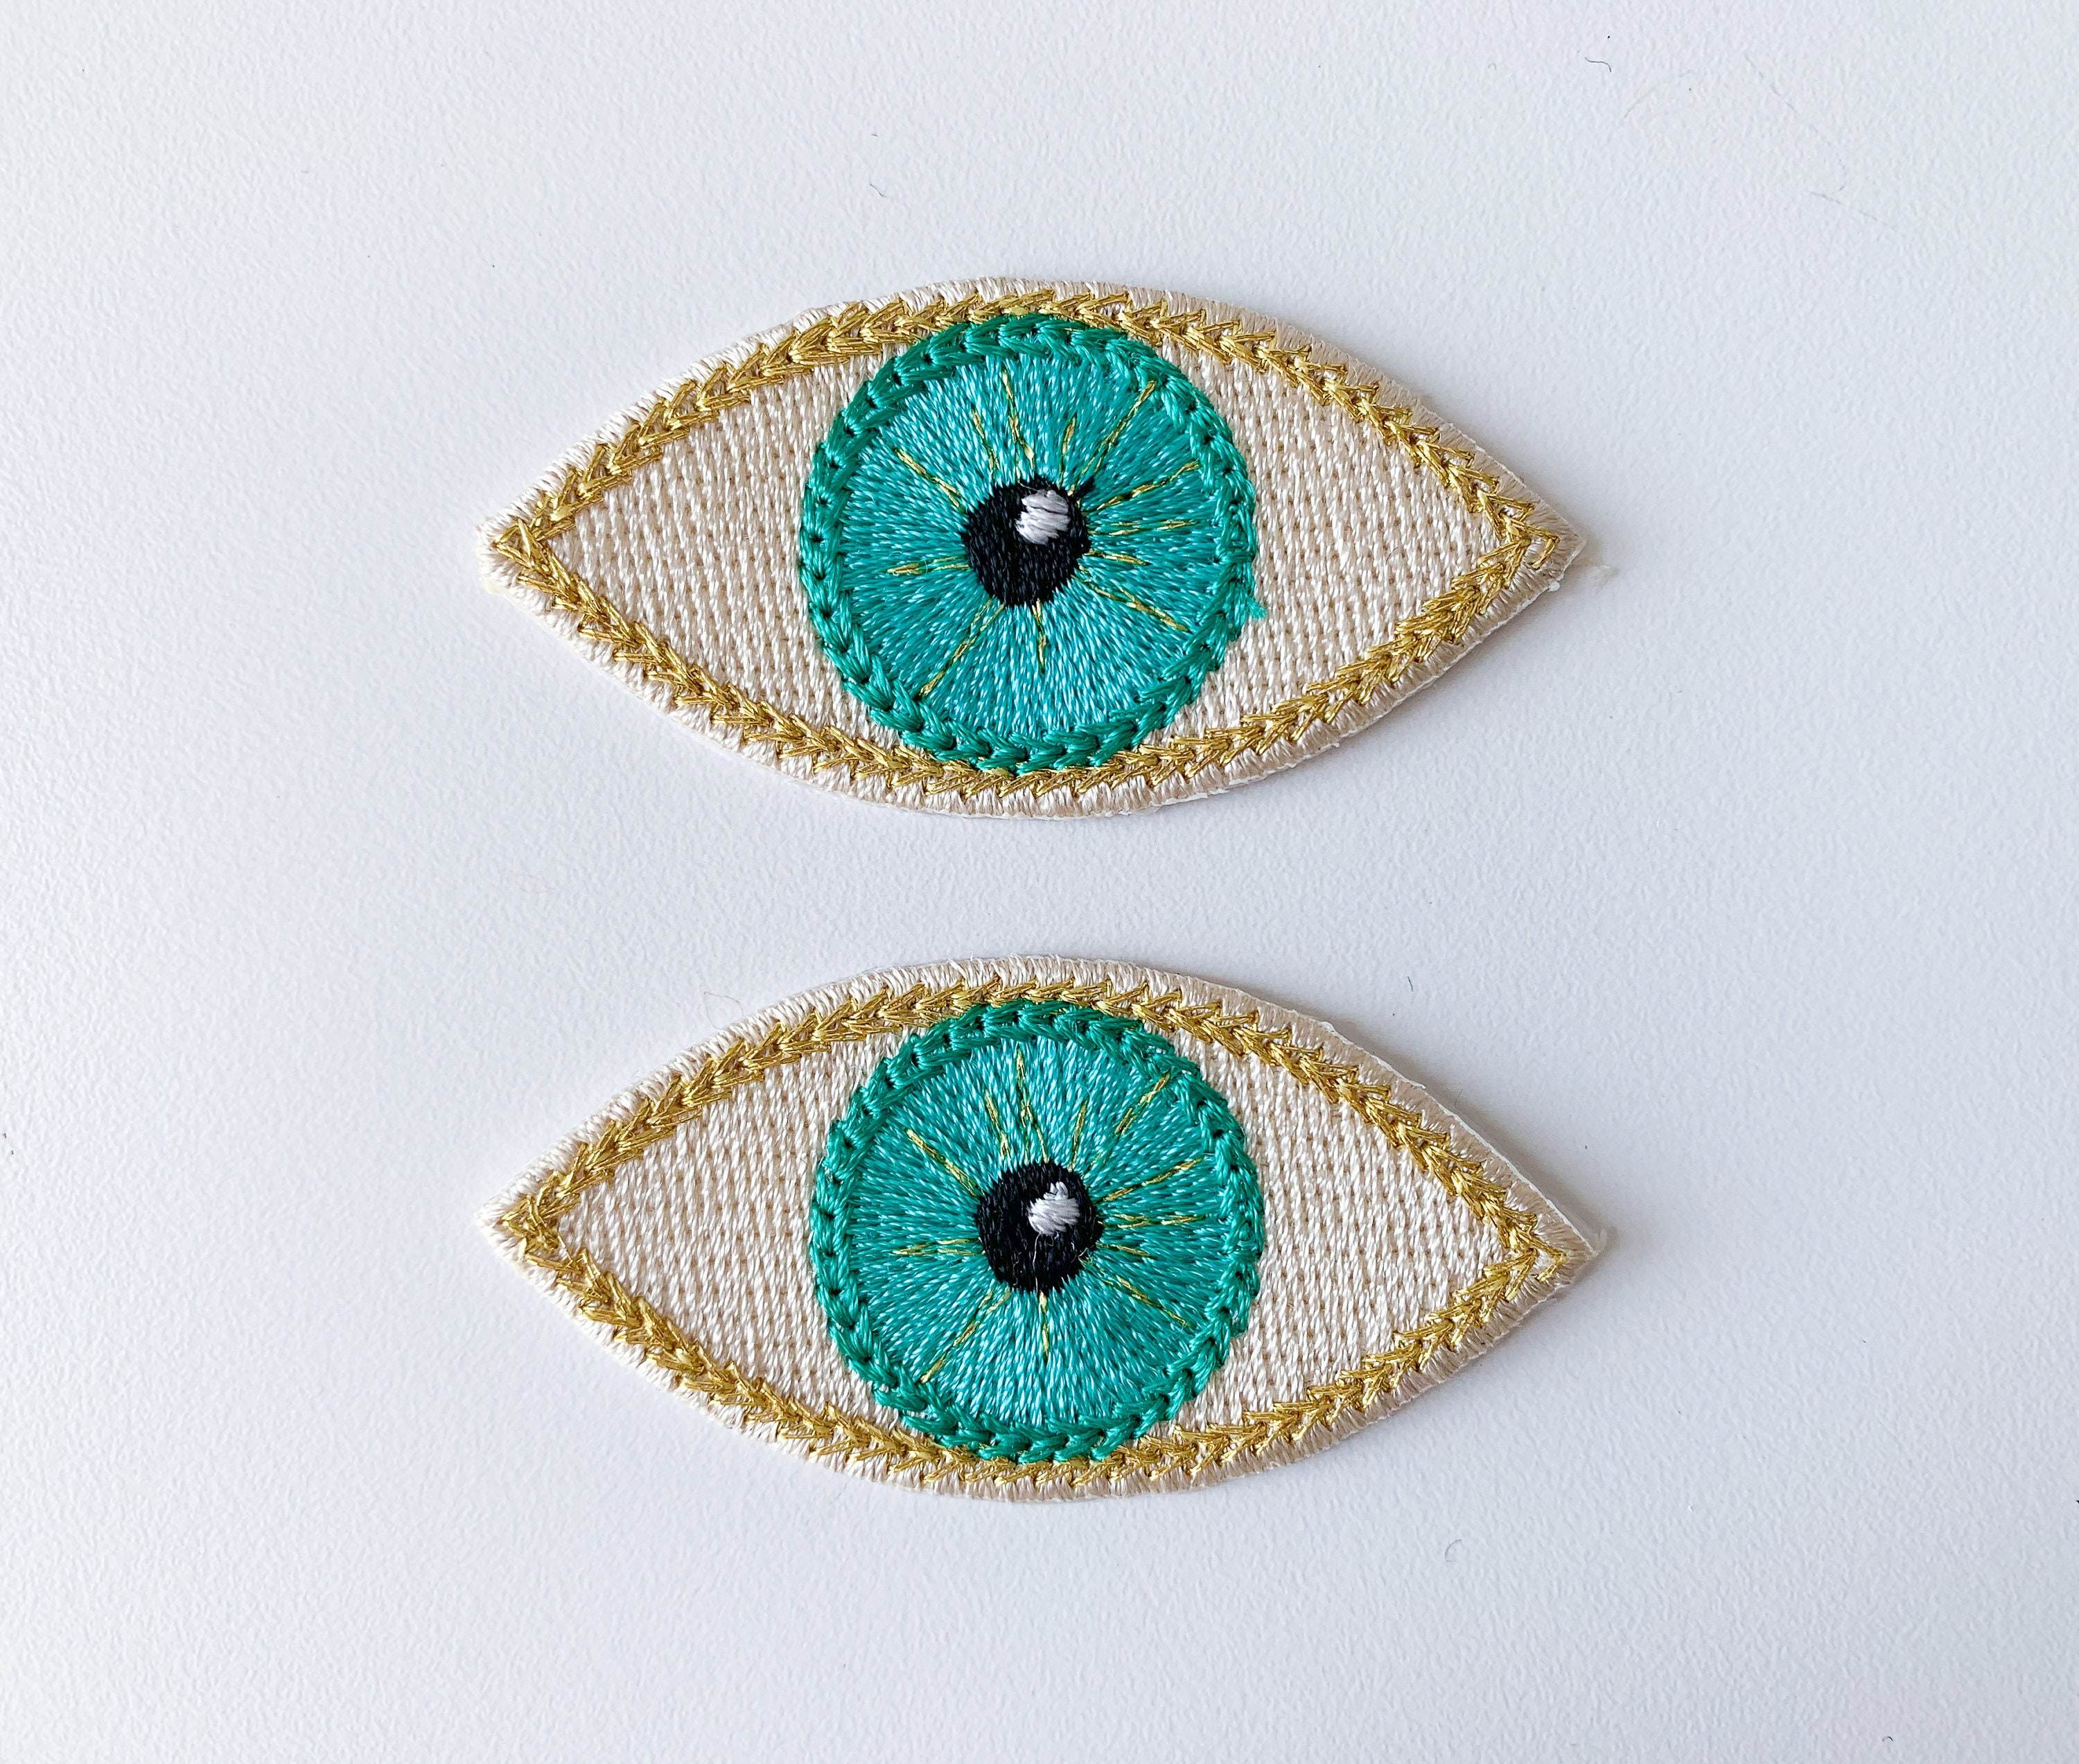 Evil Eye Iron on Patches Large Sequins Yellow Blue Embroidered Sewing Applique, Size: Dimensions : 7.5 x 5.5